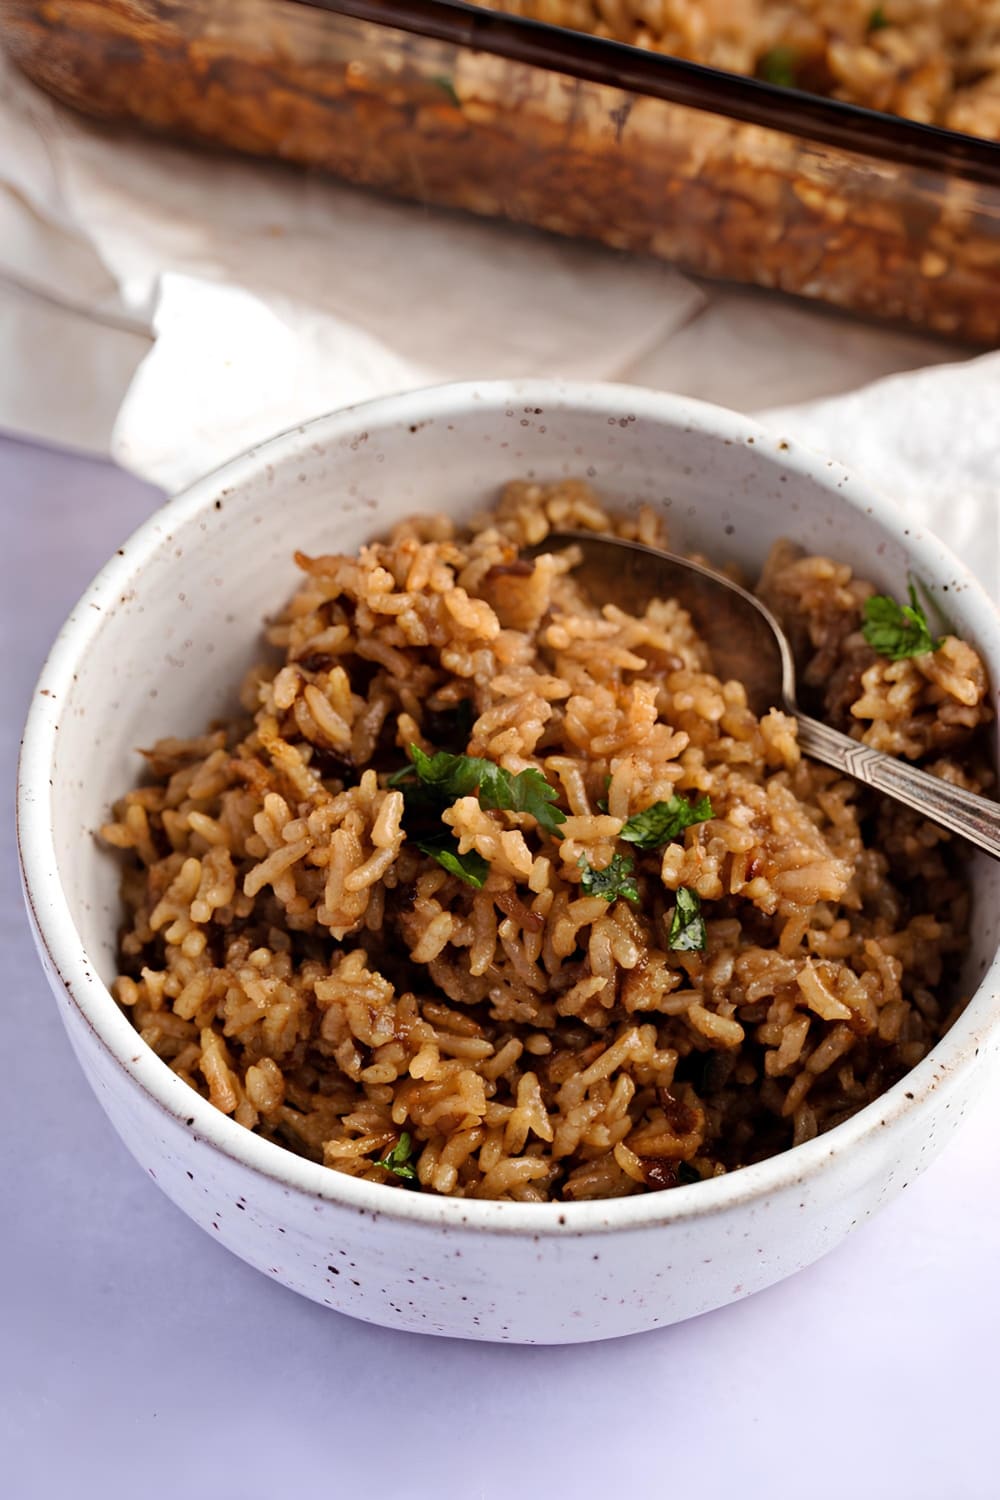 Brown colored cooked basmati rice served in a bowl and spoon, garnished with parsley